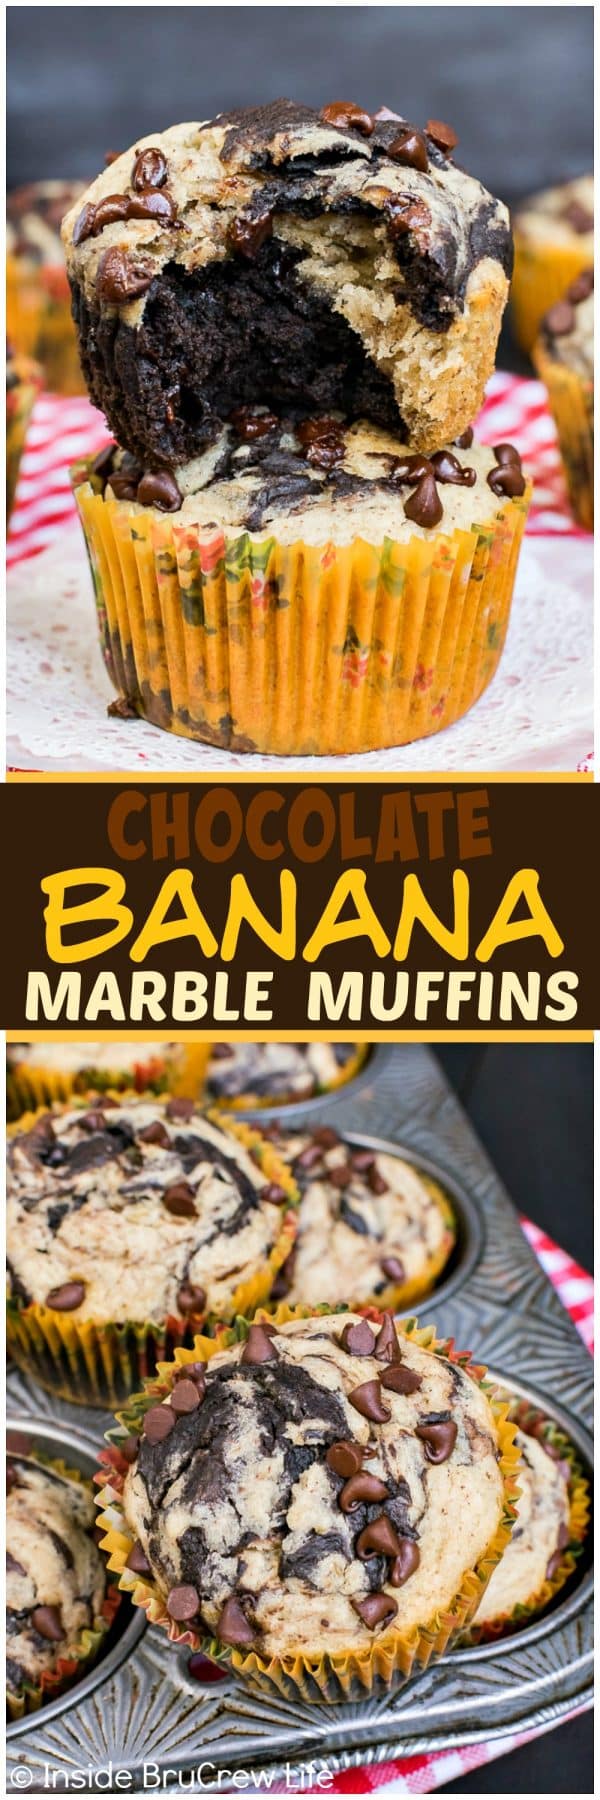 Chocolate Banana Marble Muffins - sweet swirls of chocolate and banana make these the best breakfast muffins! Great healthy recipe for busy mornings!